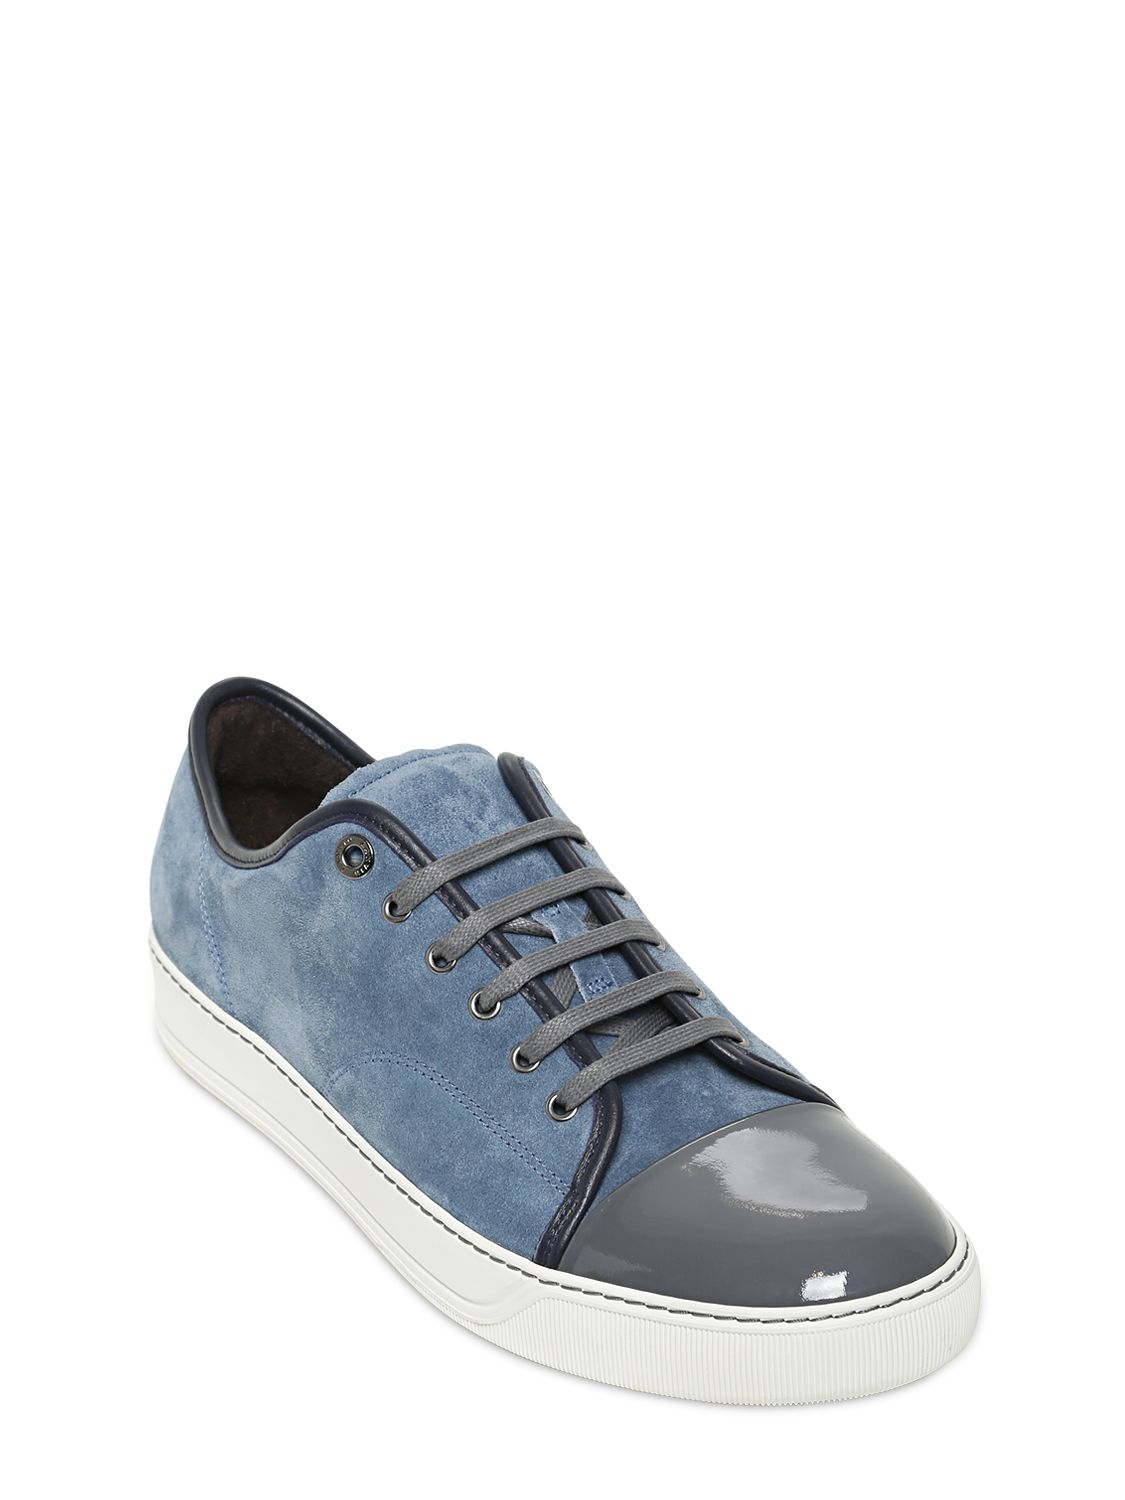 Lyst - Lanvin Patent Leather & Suede Sneakers in Blue for Men